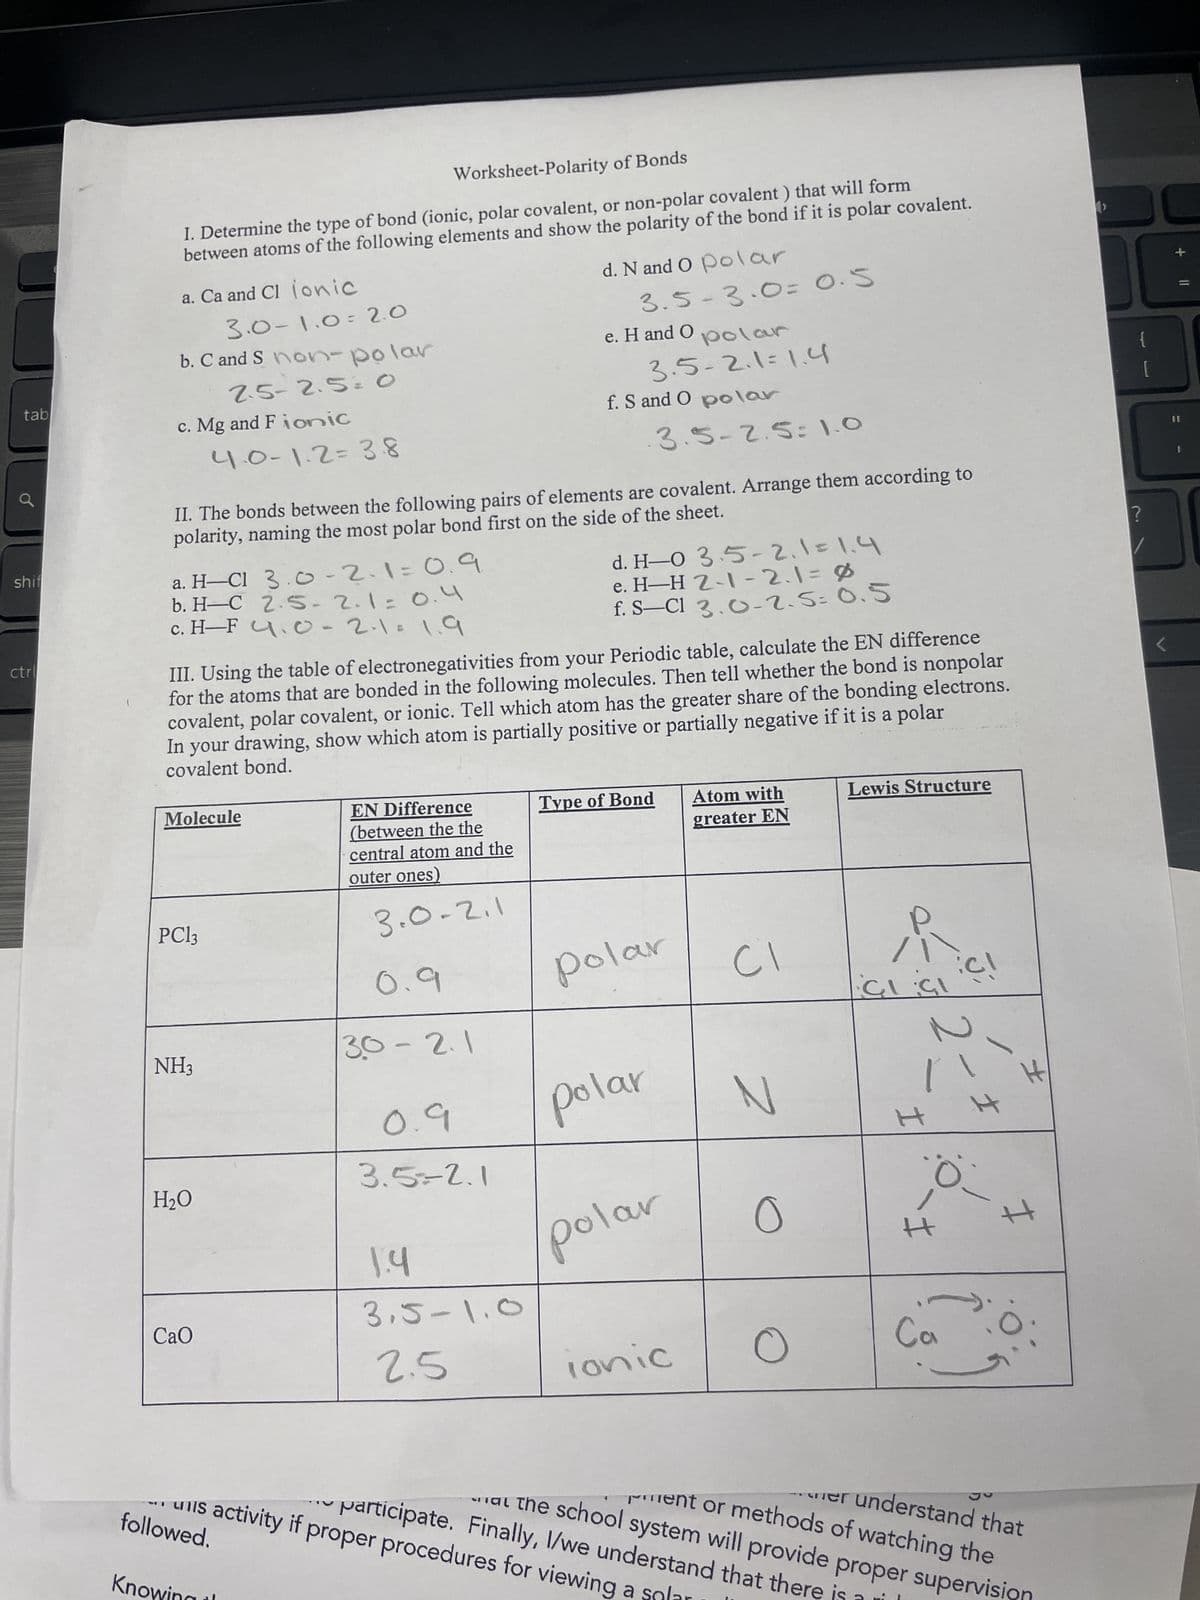 tab
Worksheet-Polarity of Bonds
I. Determine the type of bond (ionic, polar covalent, or non-polar covalent) that will form
between atoms of the following elements and show the polarity of the bond if it is polar covalent.
a. Ca and Cl ionic
3.0-1.0 2.0
b. C and S non-polar
2.5-2.5= O
c. Mg and Fionic
d. N and O polar
3.5-3.0= 0.5
e. H and O
polar
3.5-2.1=1.4
f. S and O polar
4.0-1.2=38
3.5-2.5: 1.0
II. The bonds between the following pairs of elements are covalent. Arrange them according to
polarity, naming the most polar bond first on the side of the sheet.
shif
a. H-CI 3.0-2.1=0.9
b. H-C 2.5-2.1=0.4
ctr
c. H-F 4.0-2.1=1.9
d. H-0 3.5-2.1=1.4
e. H-H 2-1-2.1=0
f. S-Cl 3.0-2.5= 0.5
III. Using the table of electronegativities from your Periodic table, calculate the EN difference
for the atoms that are bonded in the following molecules. Then tell whether the bond is nonpolar
covalent, polar covalent, or ionic. Tell which atom has the greater share of the bonding electrons.
In your drawing, show which atom is partially positive or partially negative if it is a polar
covalent bond.
Molecule
PC13
EN Difference
(between the the
central atom and the
outer ones)
3.0.2.1
0.9
Type of Bond
polar
Atom with
greater EN
Lewis Structure
[
?
CI
NH3
30-2.1
CICI
0.9
Polar
N
H
H₂O
1.4
3.5-1.0
CaO
2.5
Ionic
3.5=2.1
H
polar
0
I
Ca
followed.
A
er understand that
Pent or methods of watching the
participate. Finally, I/we understand that there
at the school system will provide proper supervi
activity if proper procedures for viewing a
Kno
+ ||
=